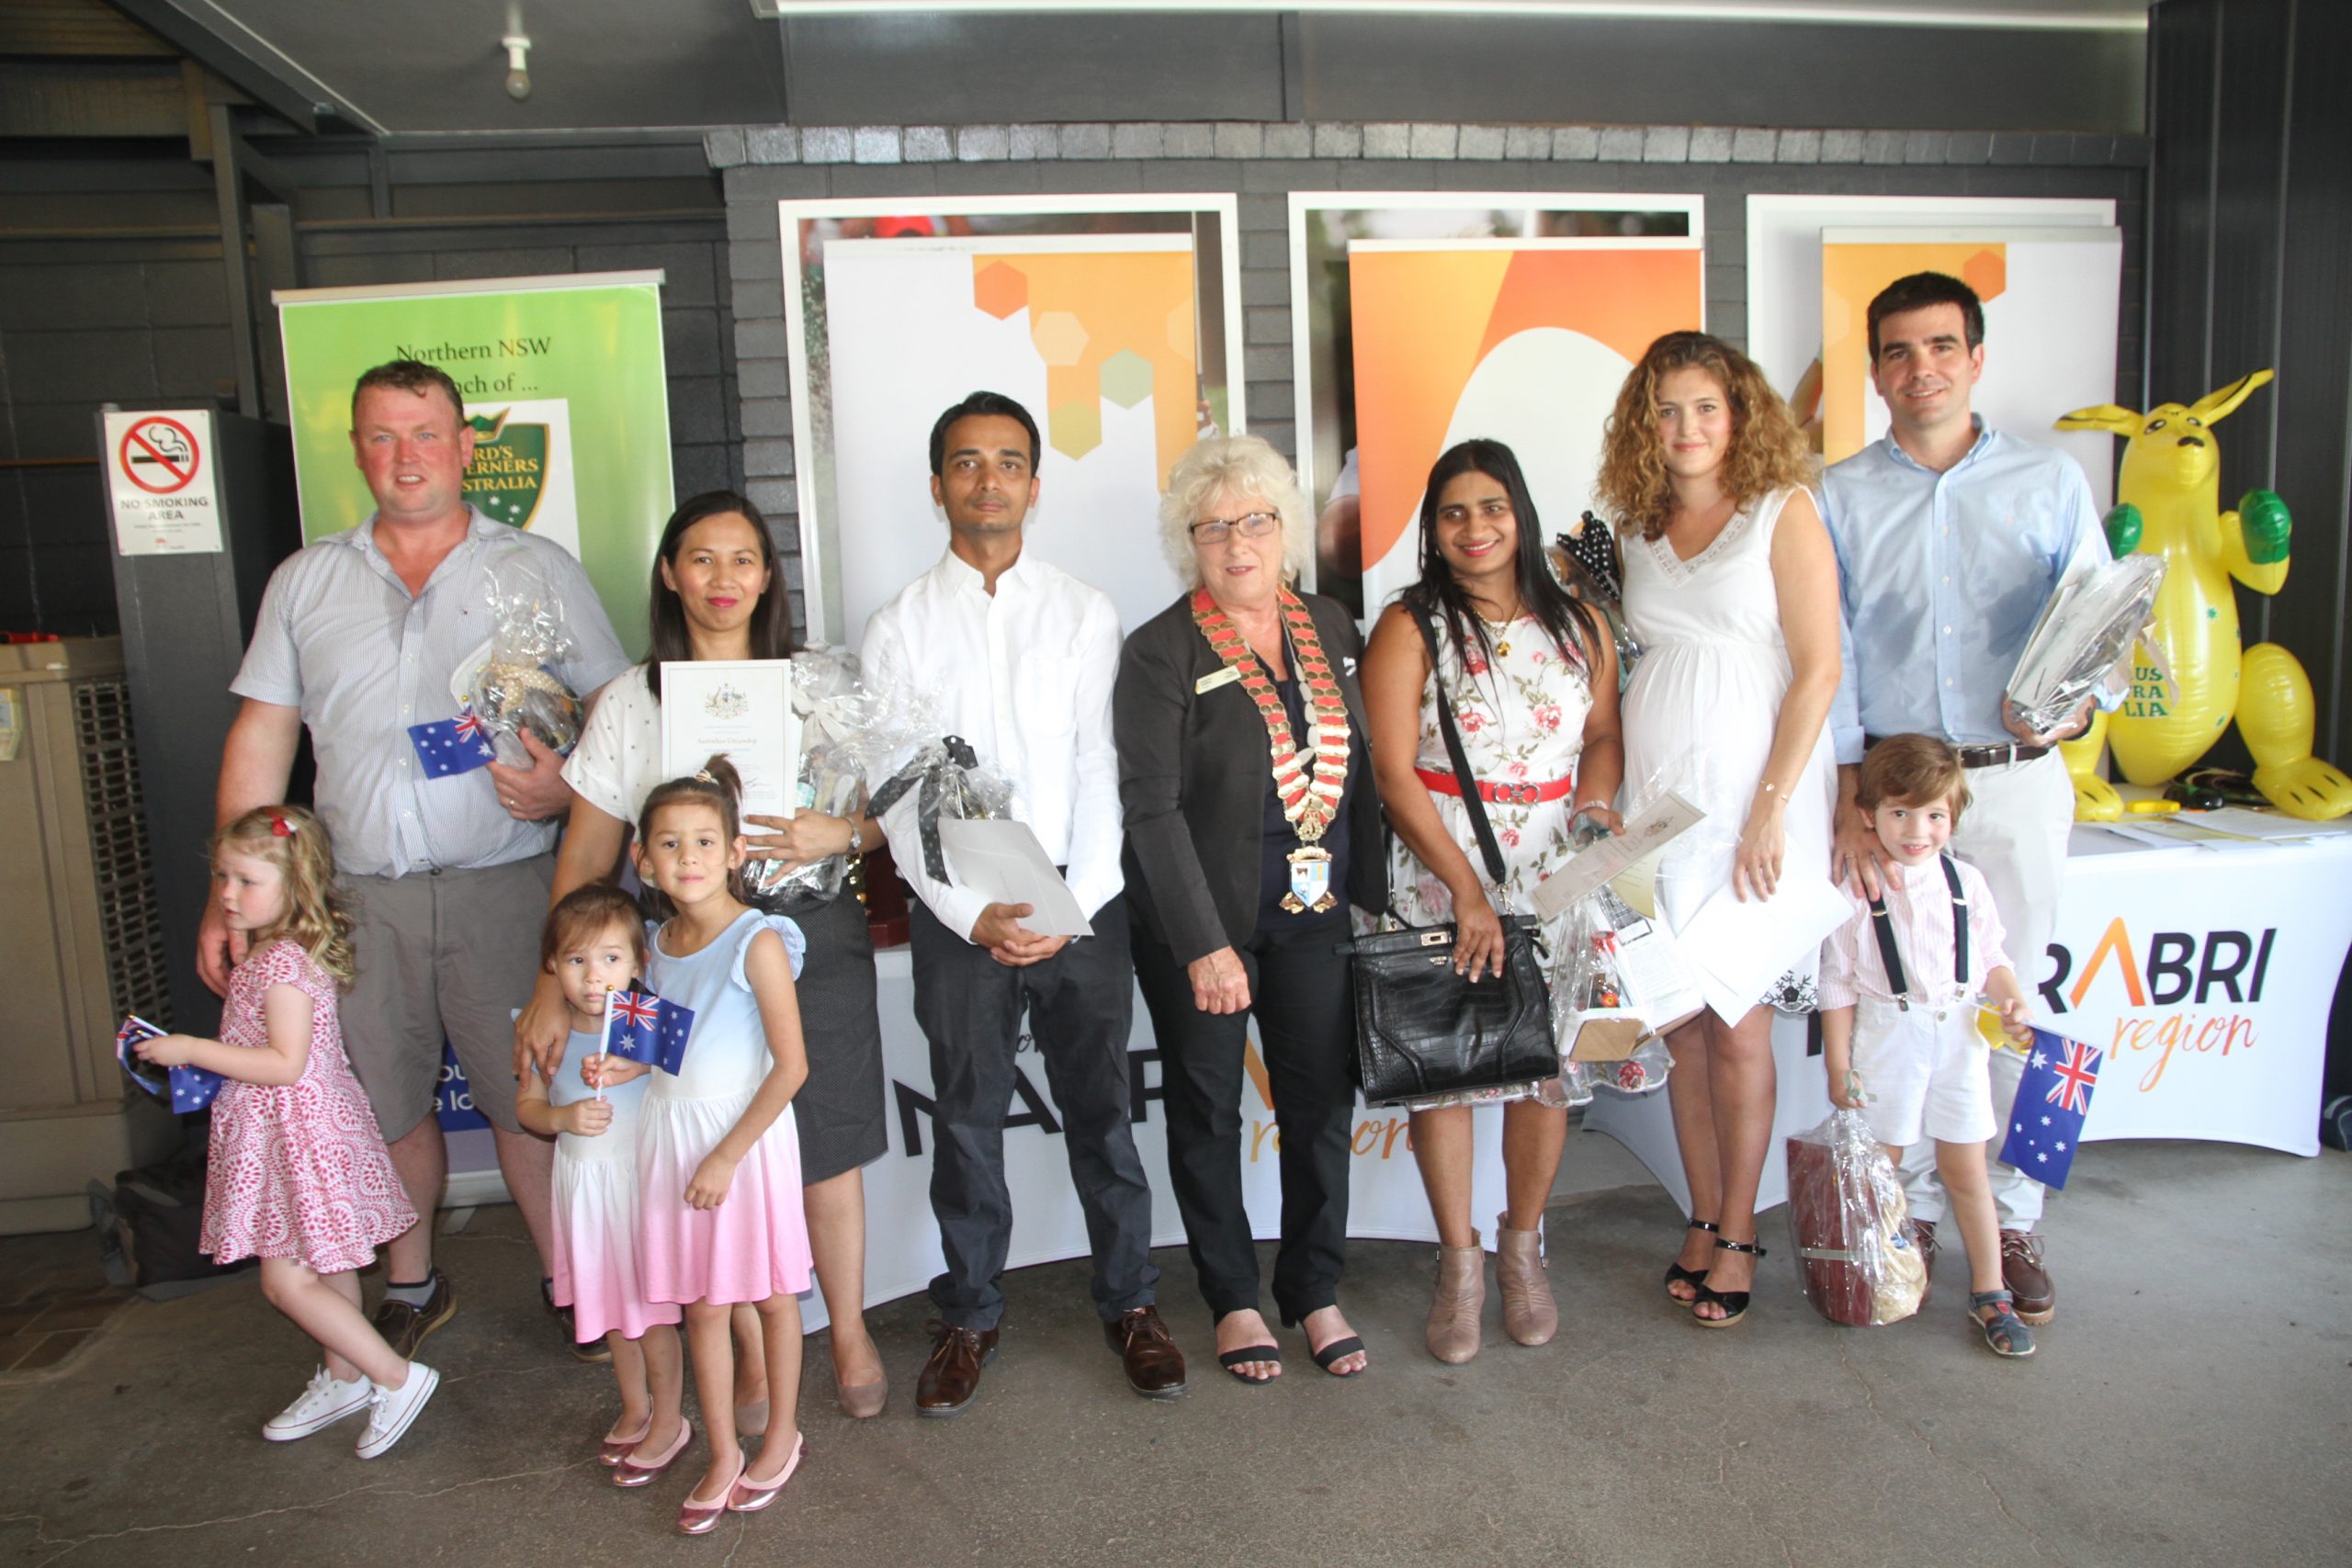 New citizens welcomed on Australia Day 2020